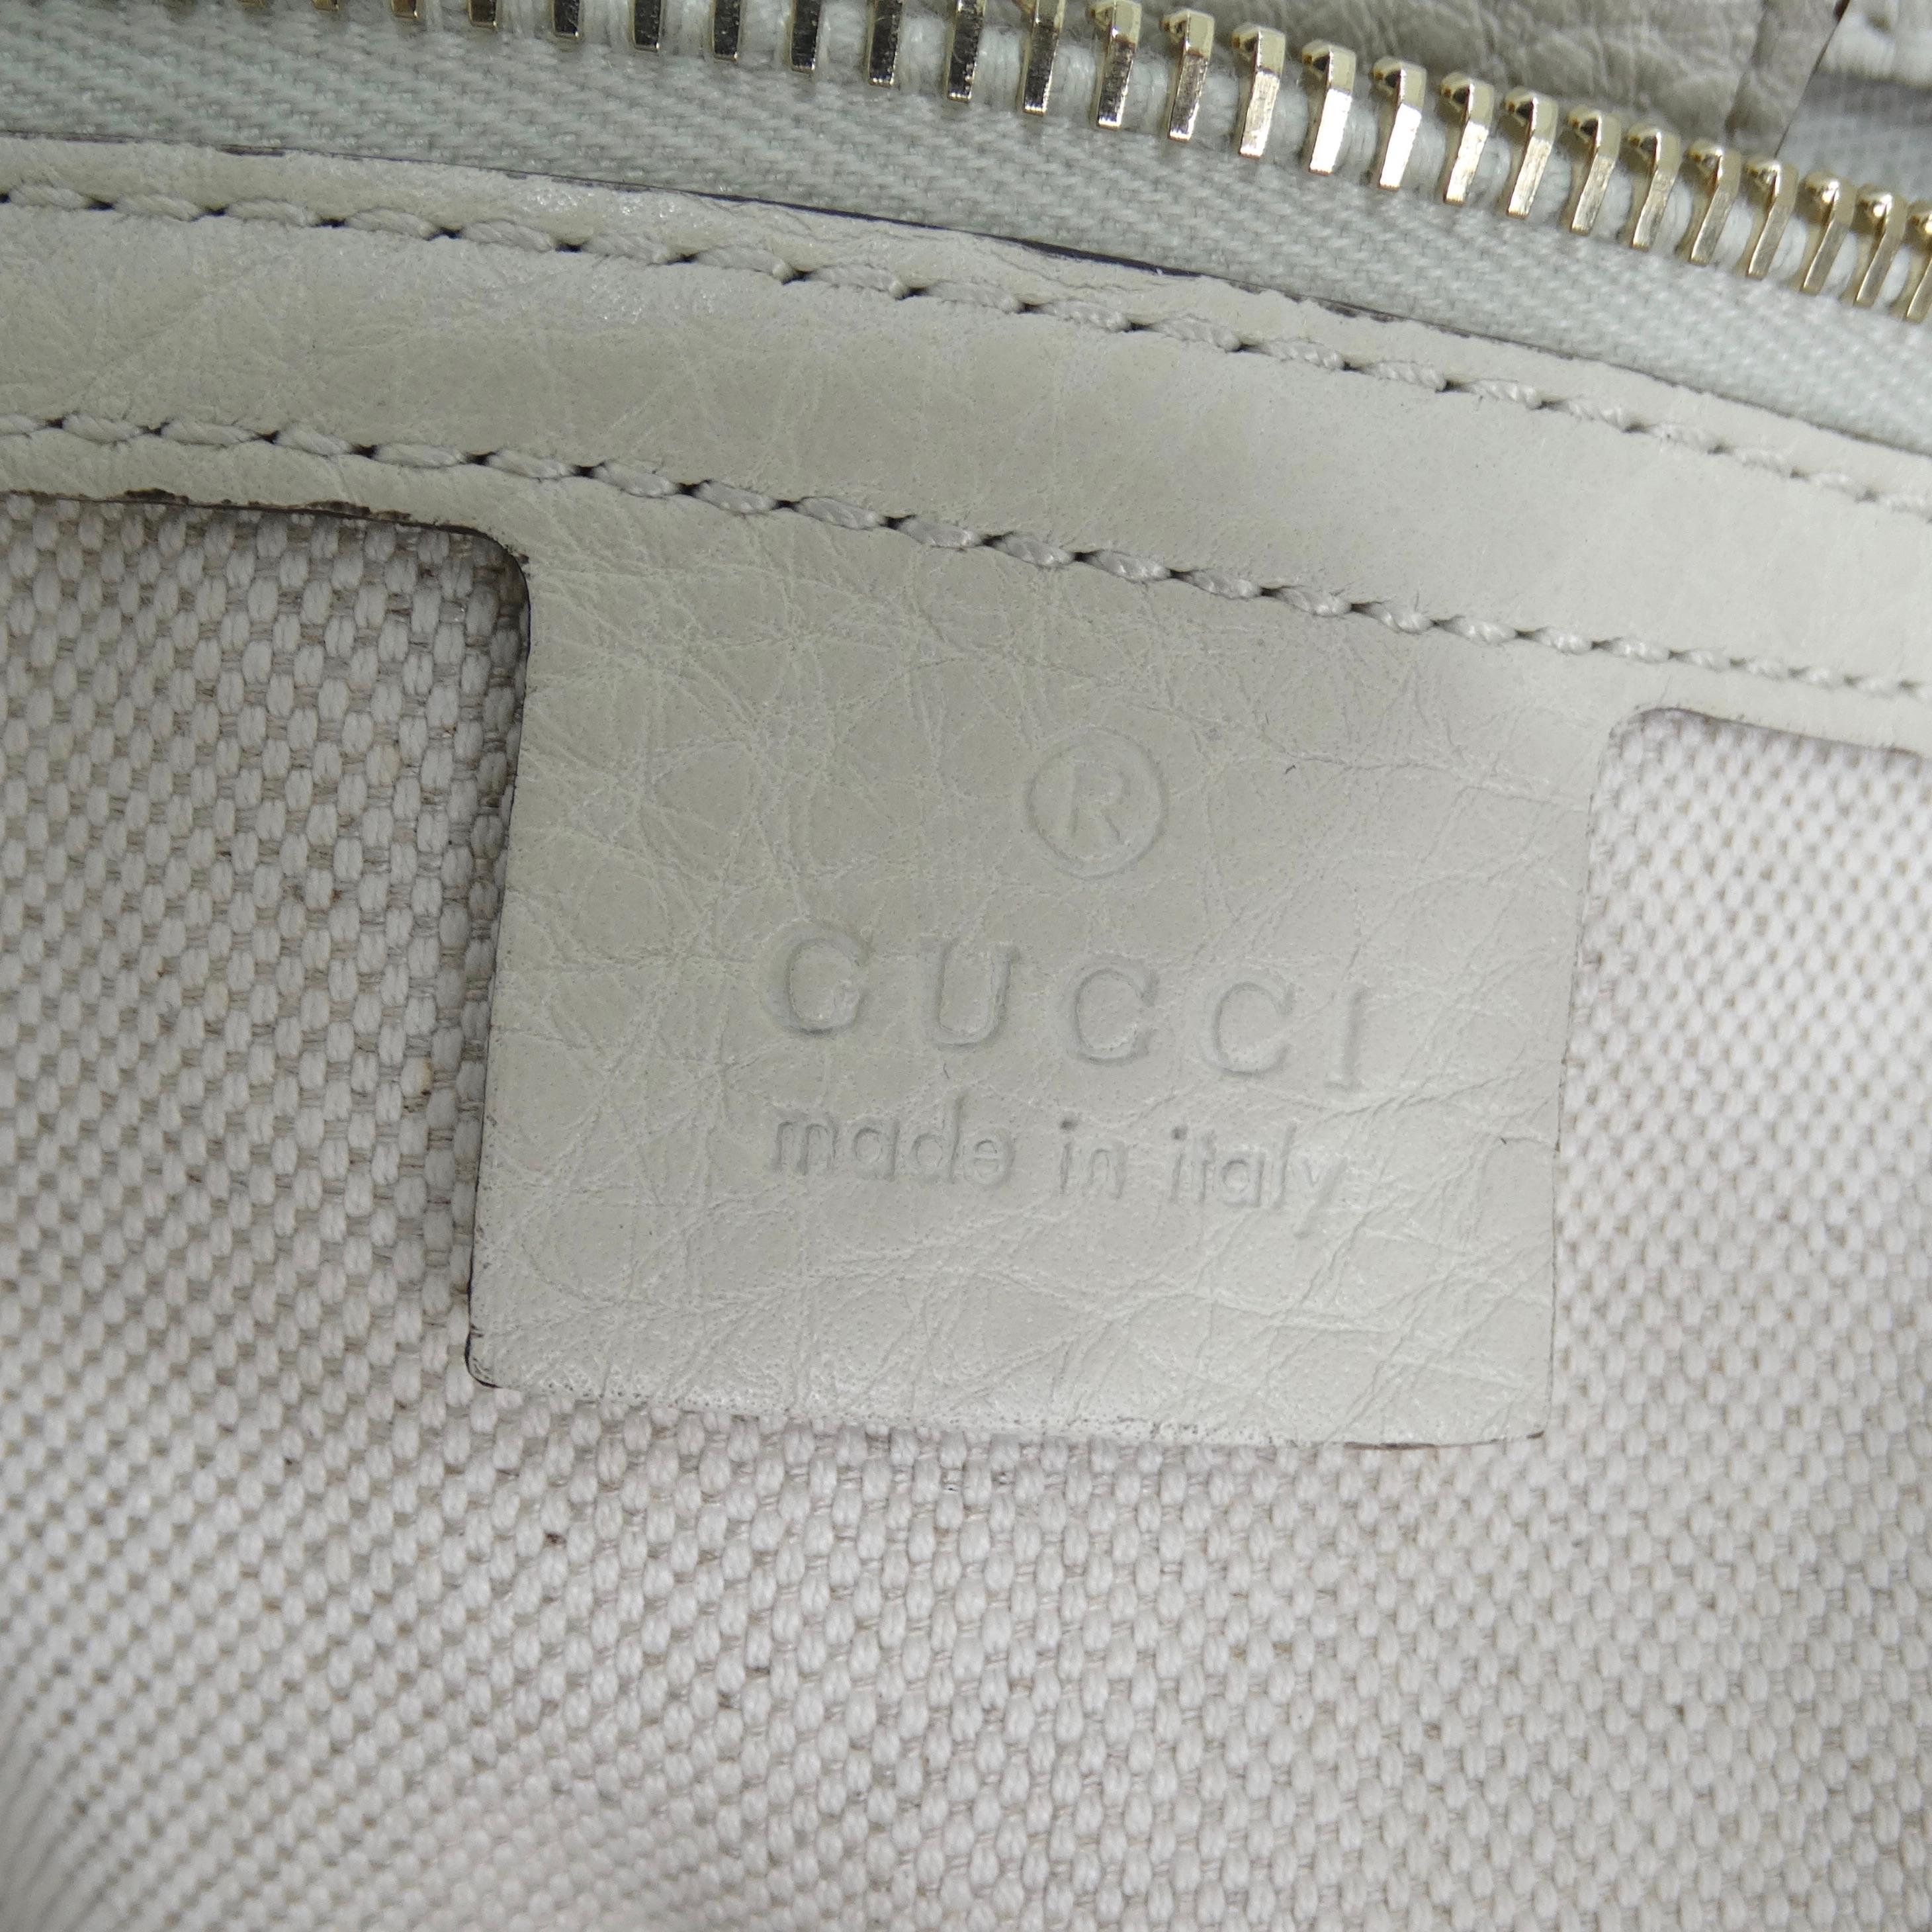 Gucci Bamboo Shopper Leather Tote Bag For Sale 8